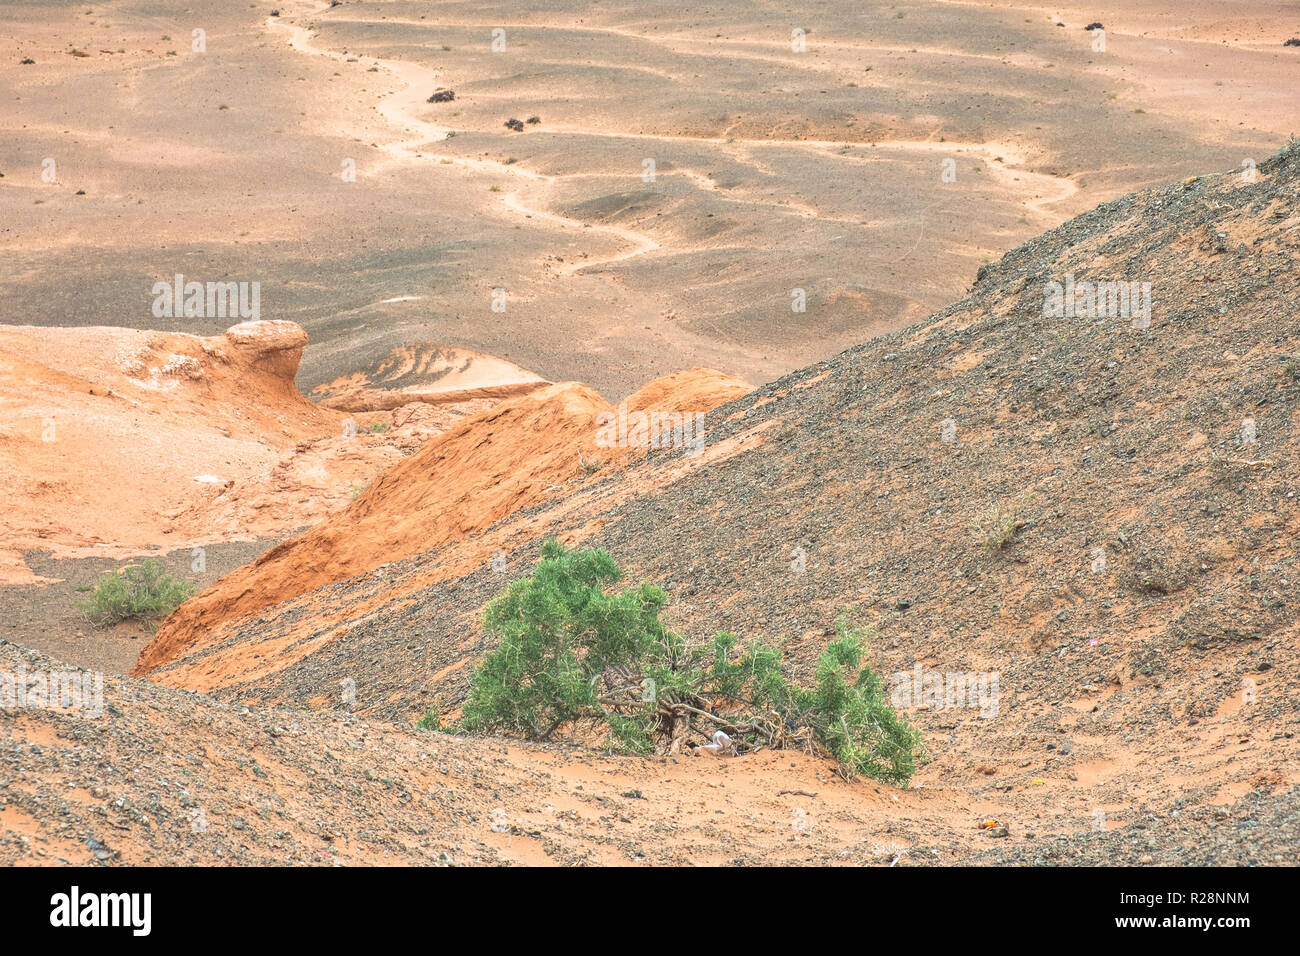 Scarce vegetation with one or two Saxaul trees growing on this sandstone in the Gobi desert. Stock Photo